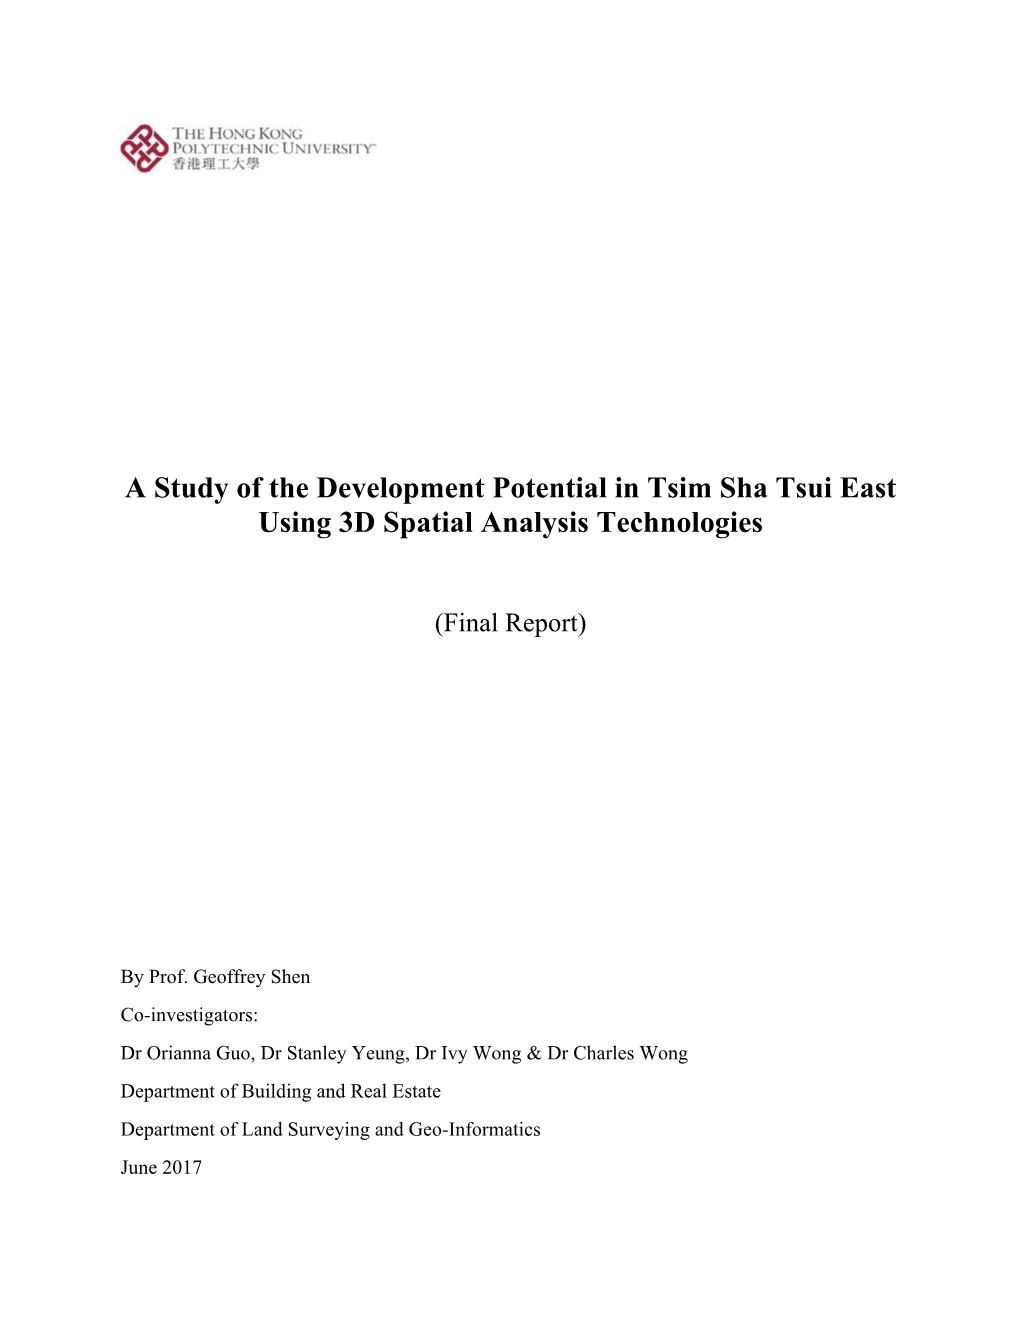 A Study of the Development Potential in Tsim Sha Tsui East Using 3D Spatial Analysis Technologies